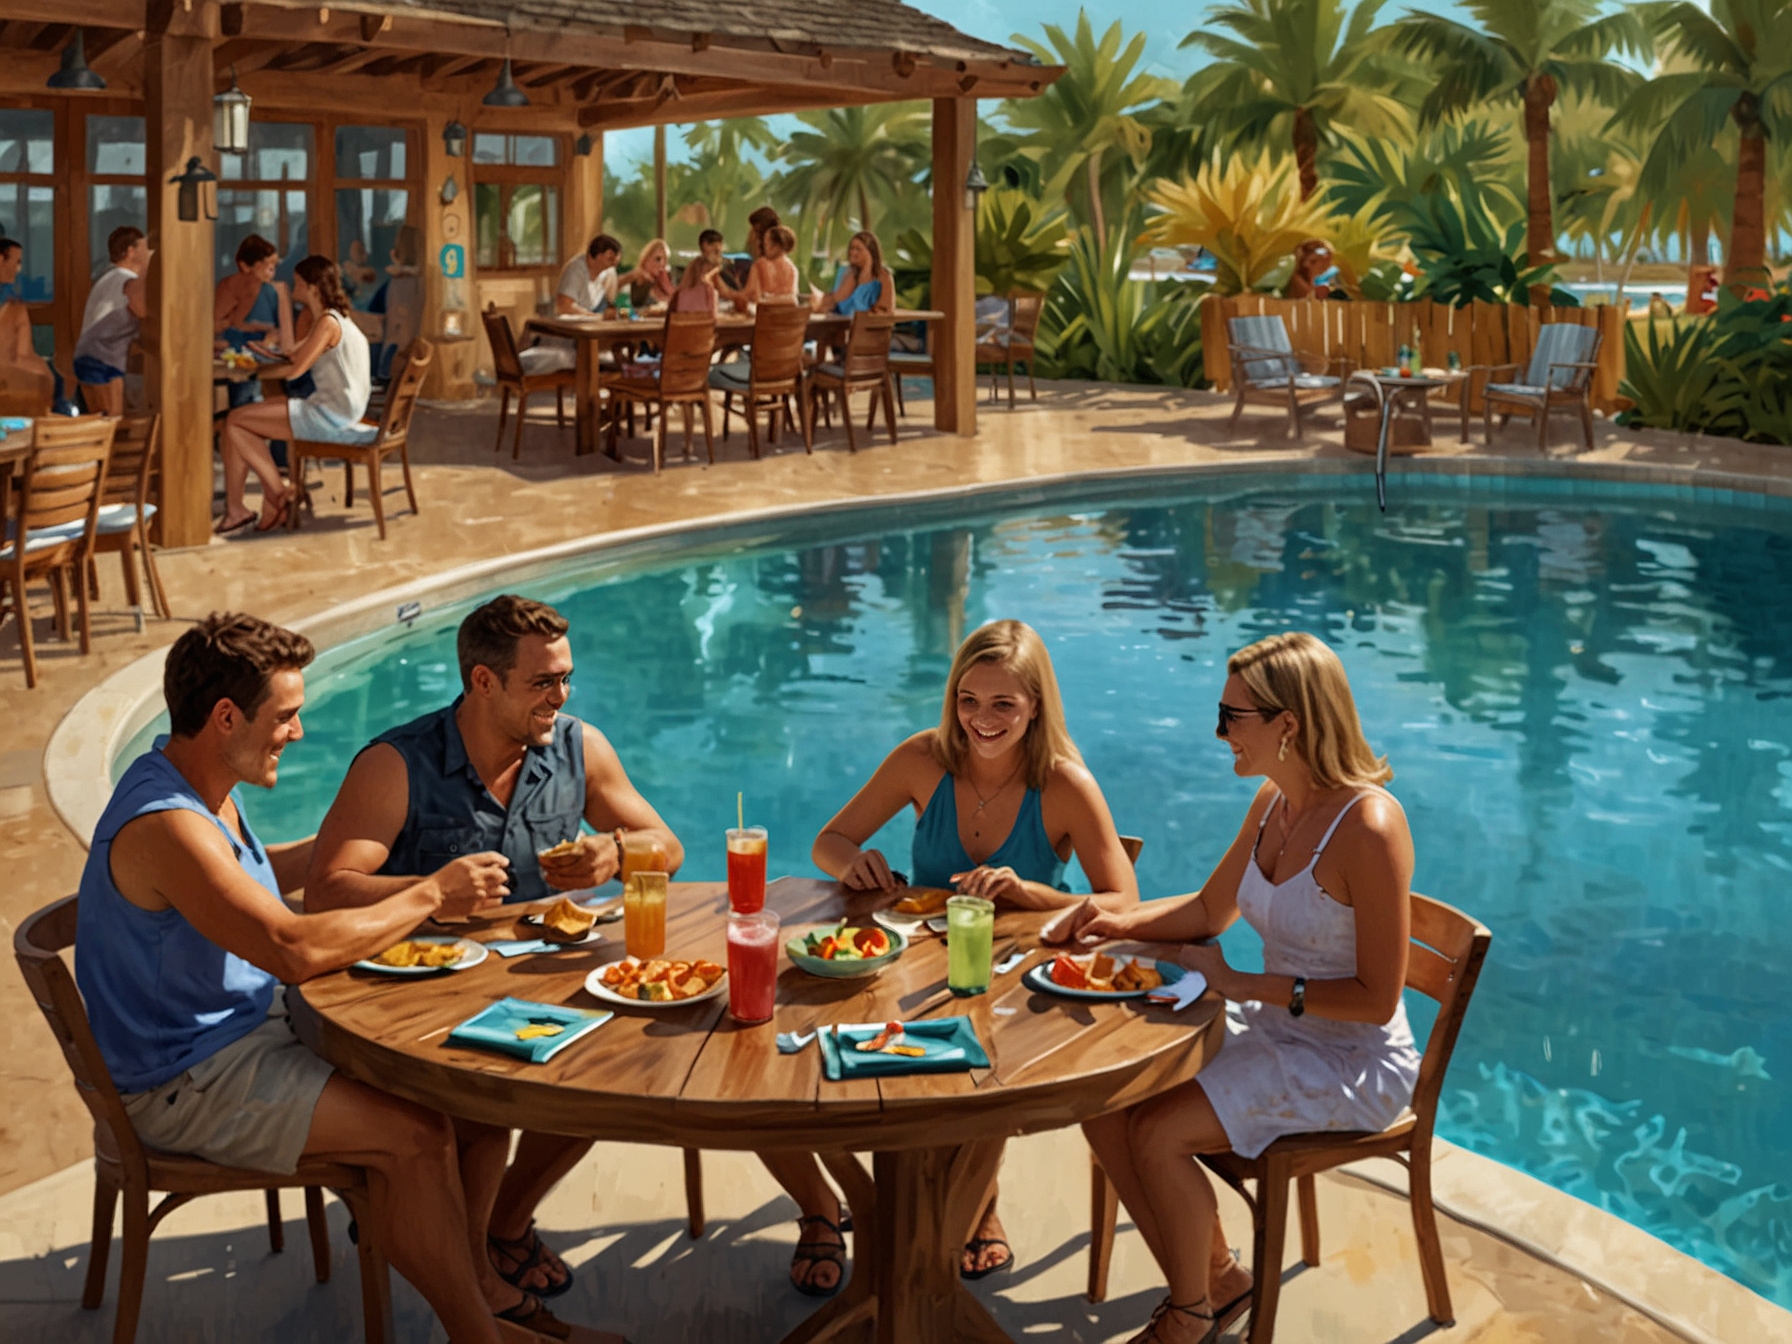 Families enjoying Camp Margaritaville amenities: kids engaged in crafts, couples lounging by the resort-style pool, and guests dining at the on-site bar & grill.